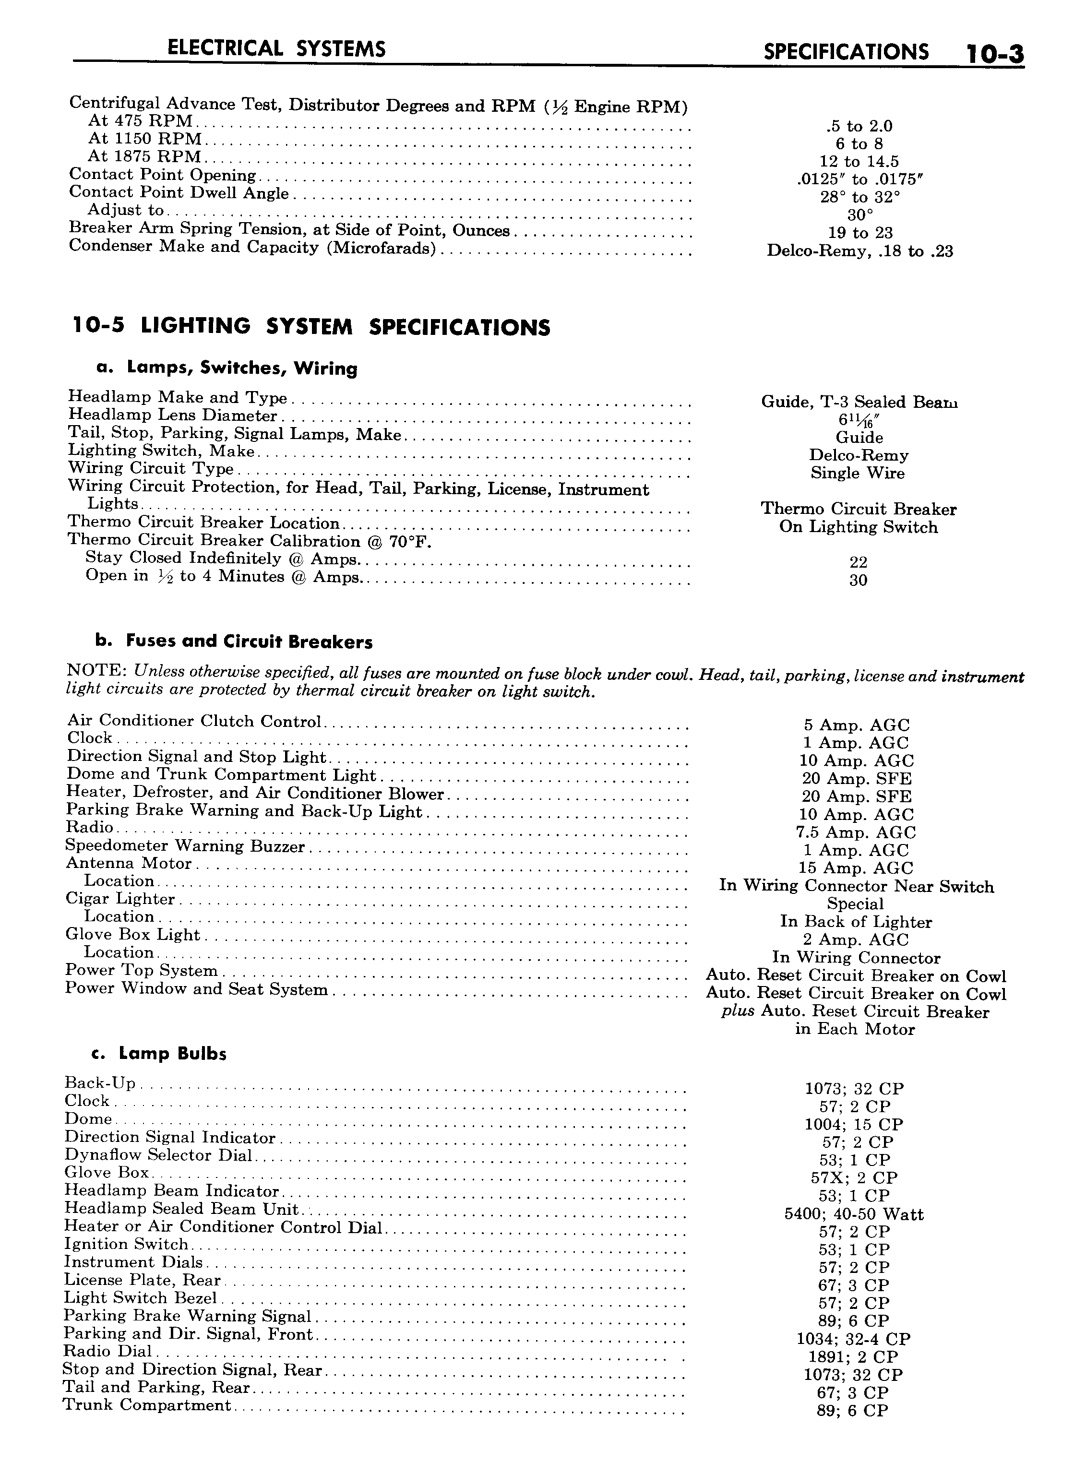 n_11 1957 Buick Shop Manual - Electrical Systems-003-003.jpg